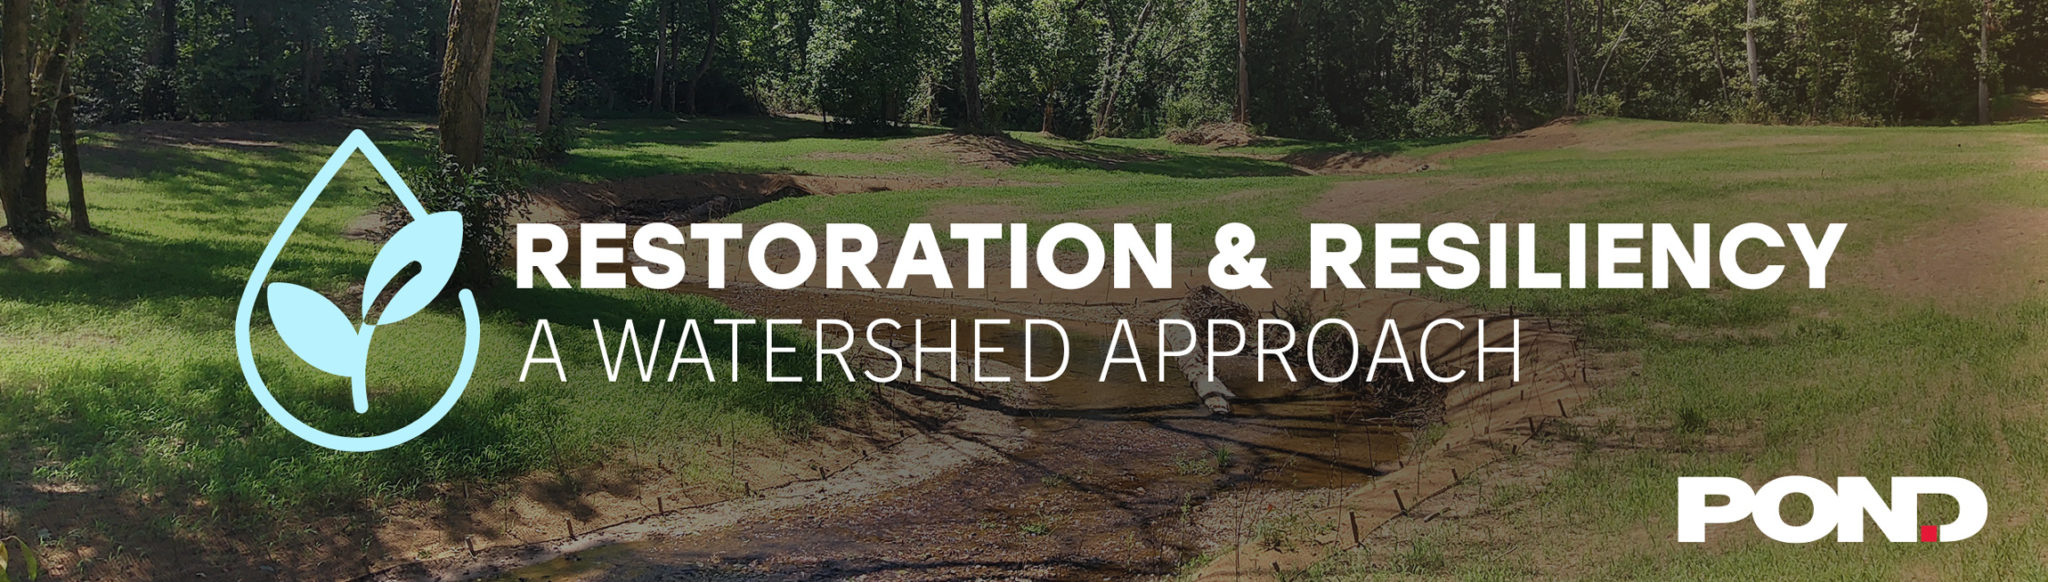 Restoration and Resiliency - a Watershed Approach